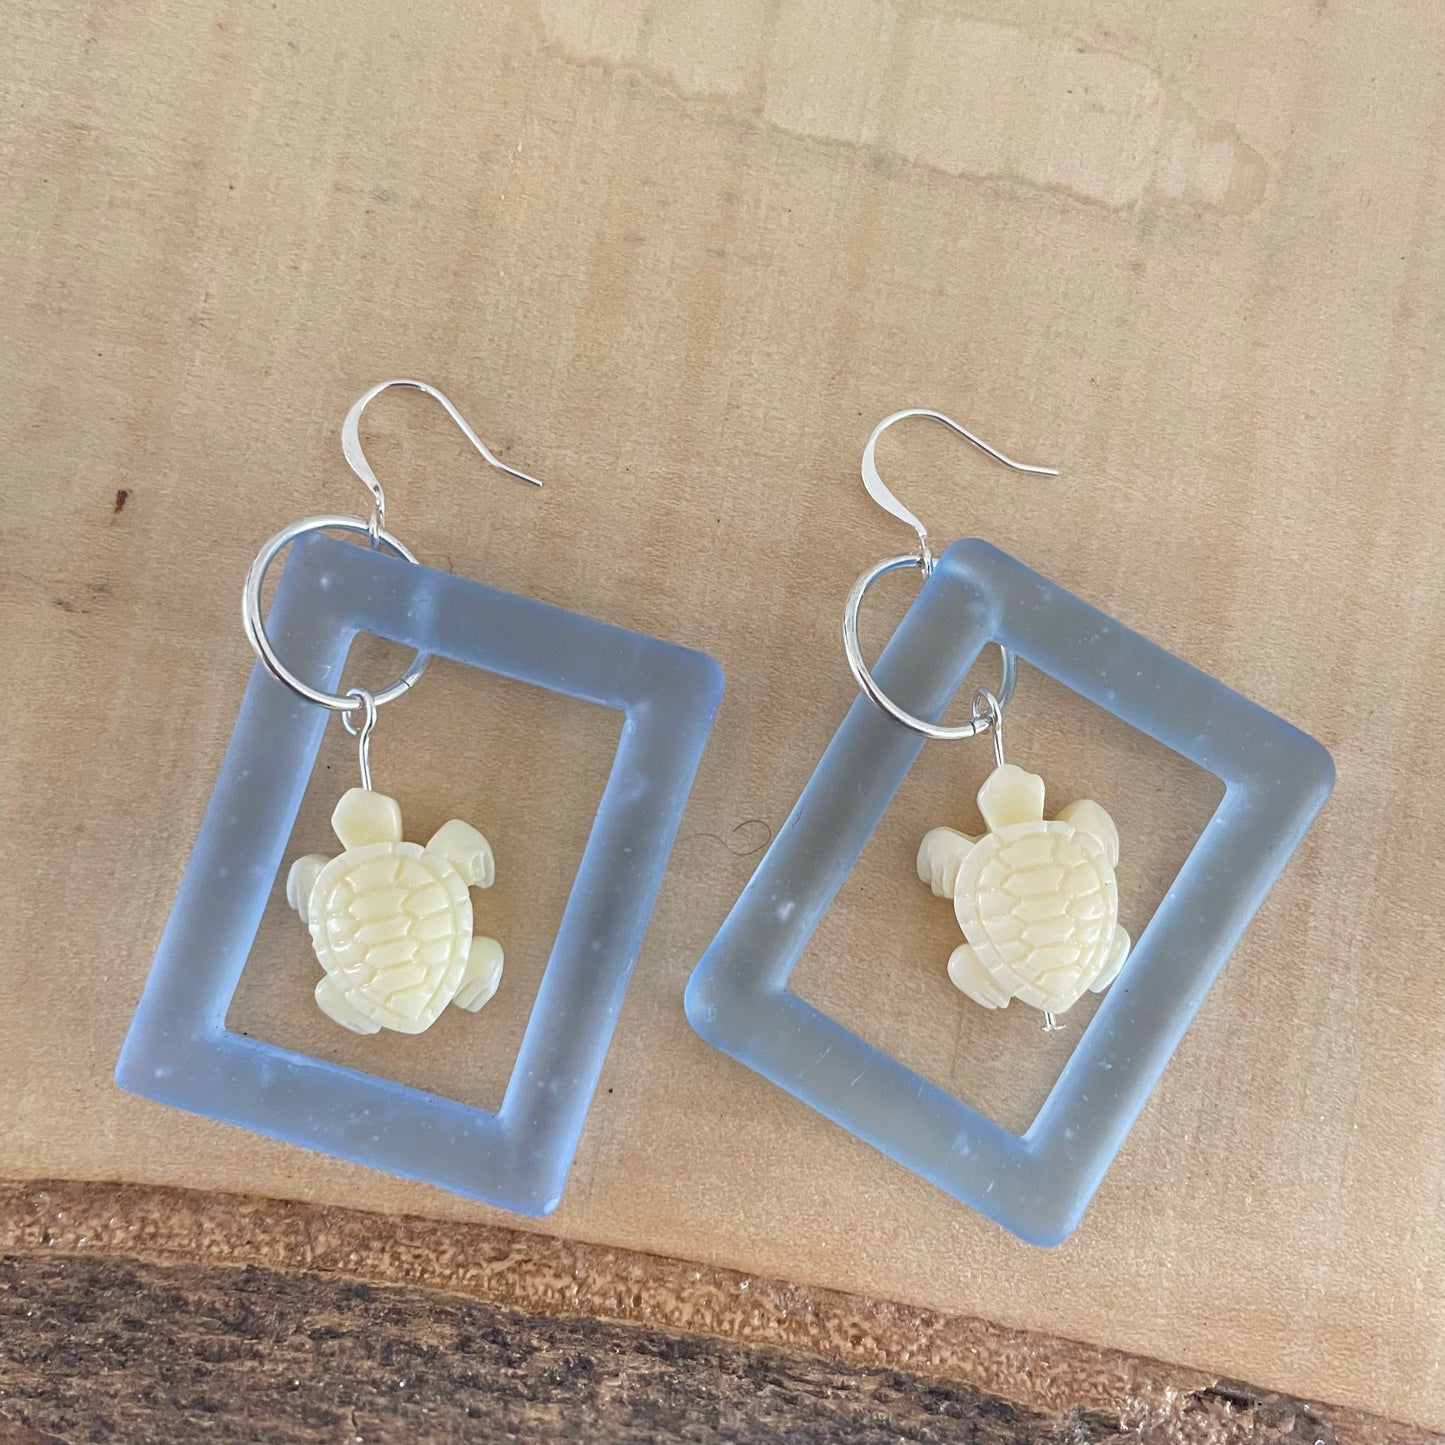 Pastel Blue Frosted Glass & Cream Acrylic Turtle Earrings Handmade Geometric Large Statement Ocean Sea Life